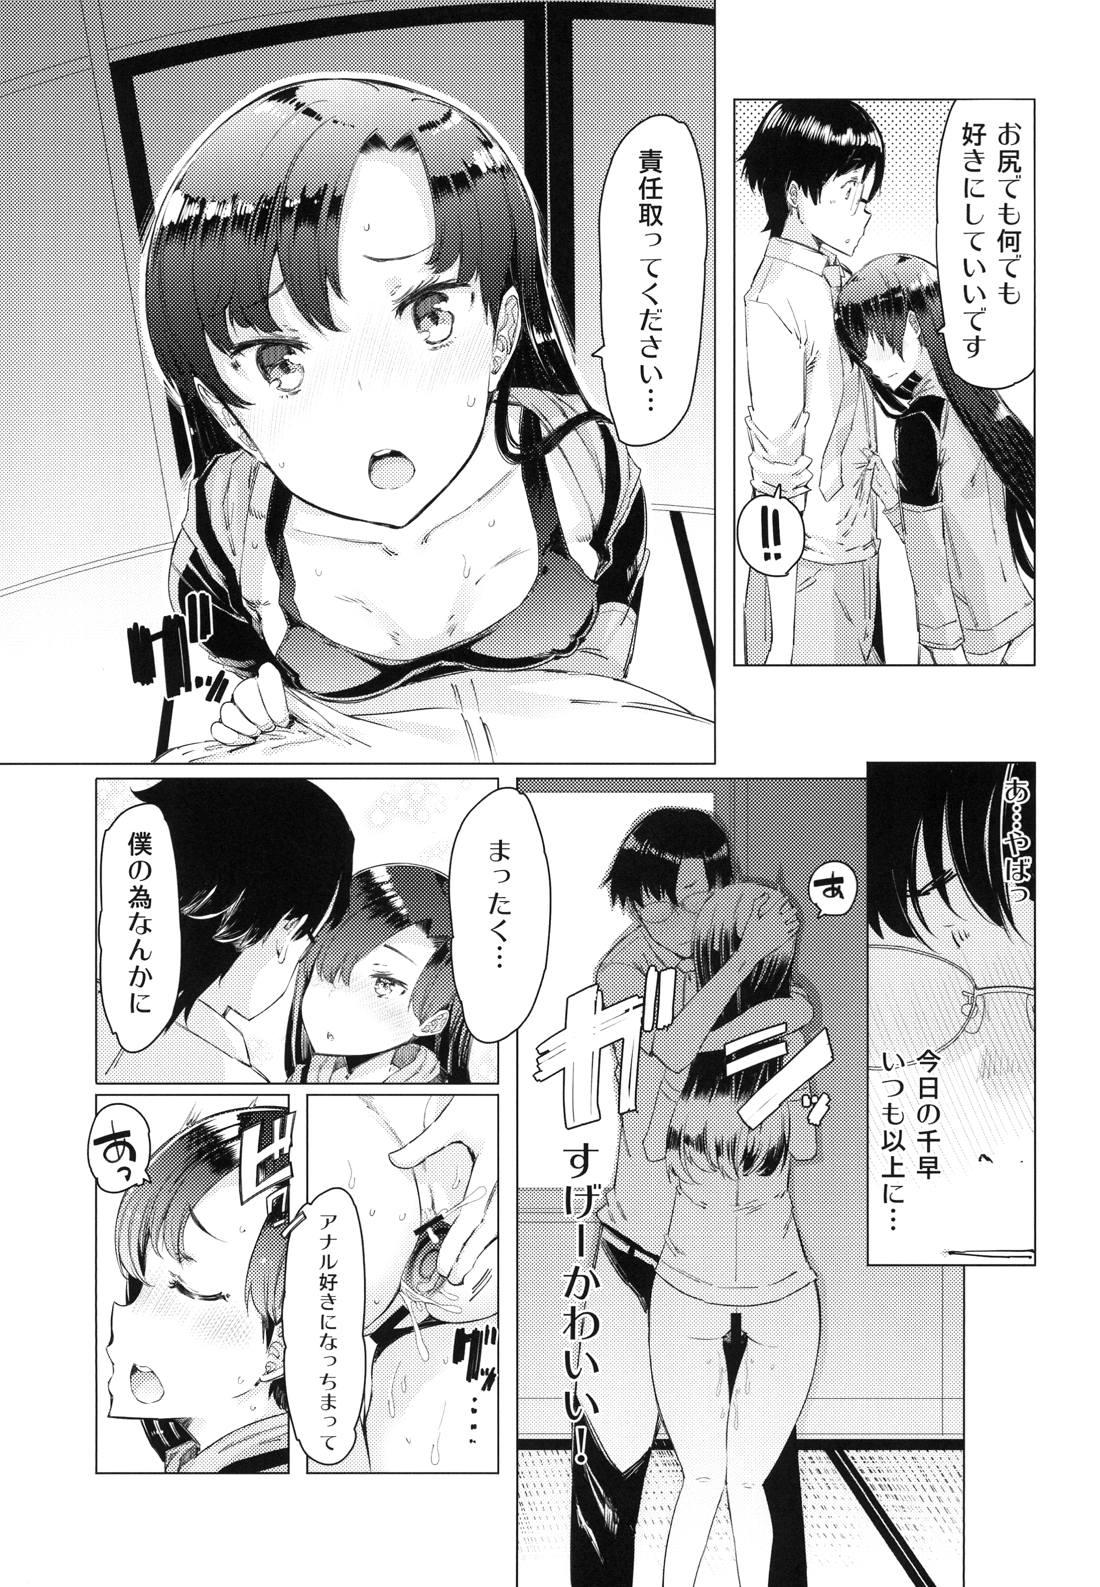 4some HOP Vol. 03 - The idolmaster Tites - Page 8